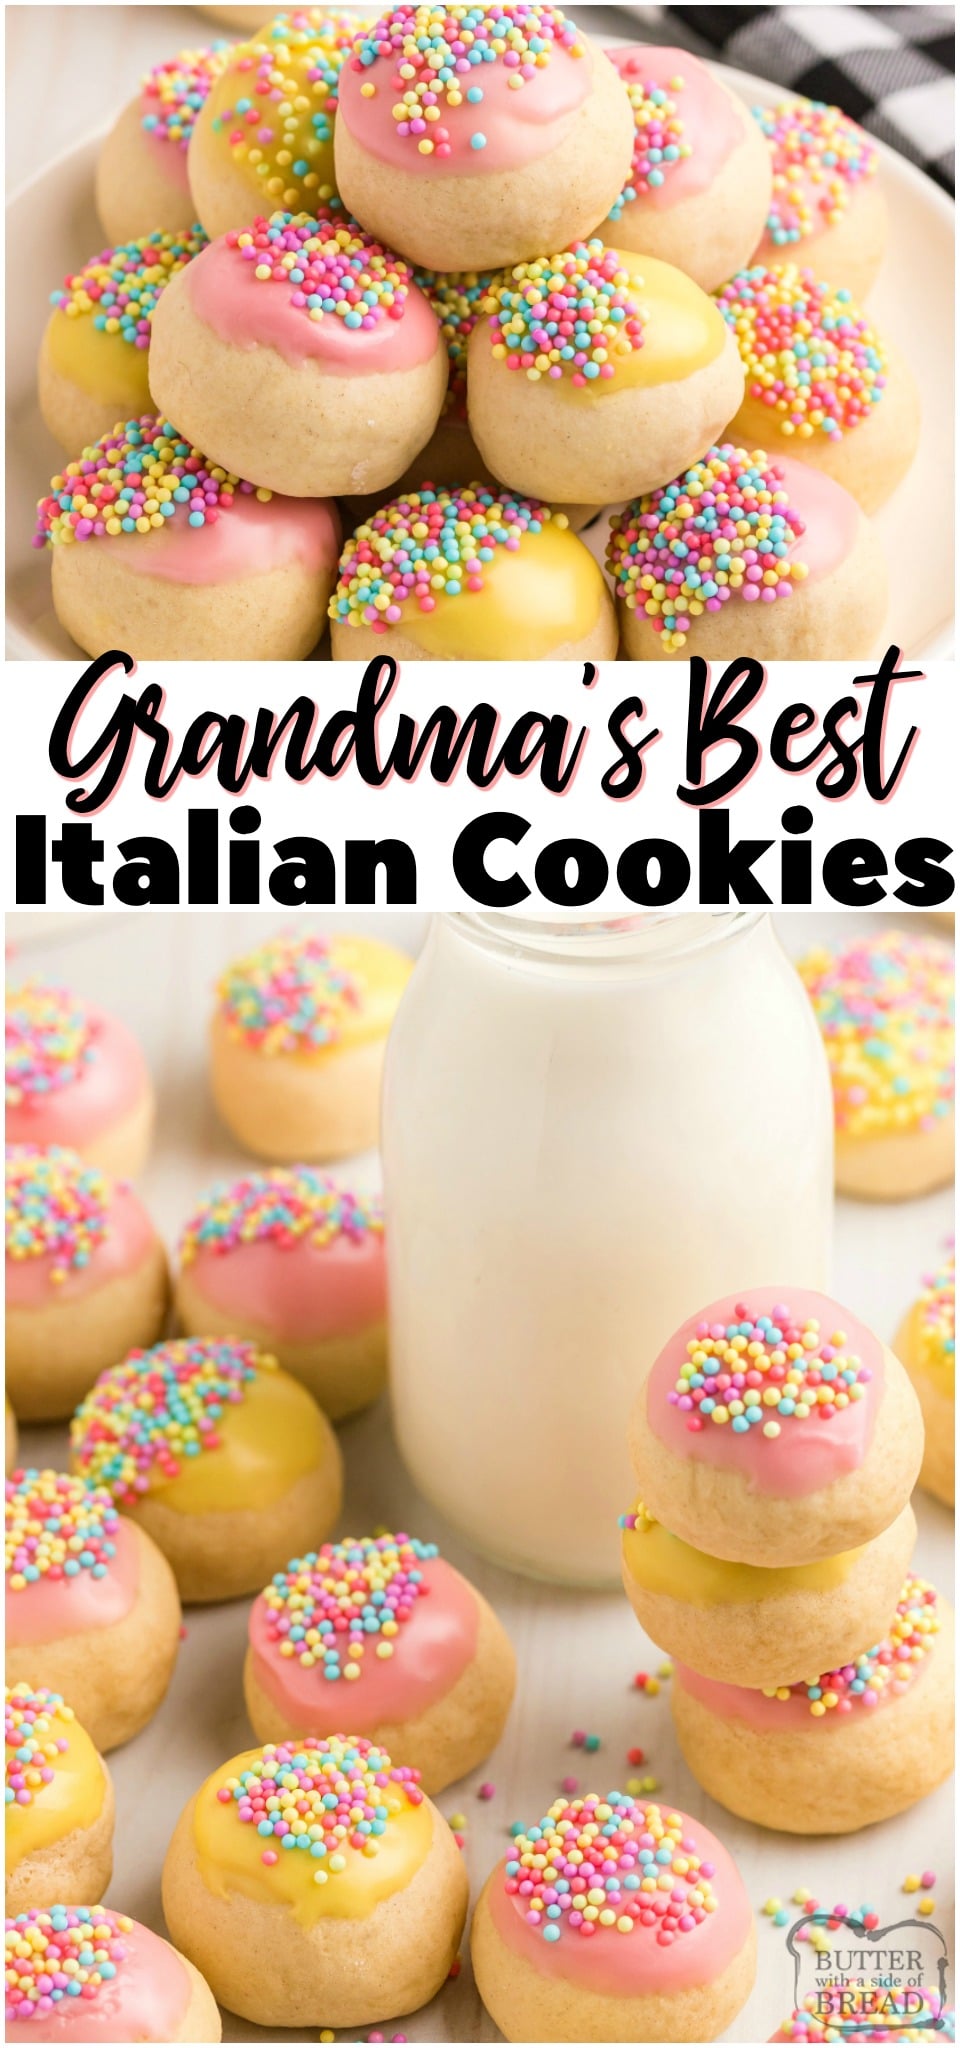 Italian cookies with frosting are perfectly sweet and tender cookies with a simple vanilla glaze. Lovely Italian Cookies topped with a sweet glaze and colorful sprinkles for any occasion!